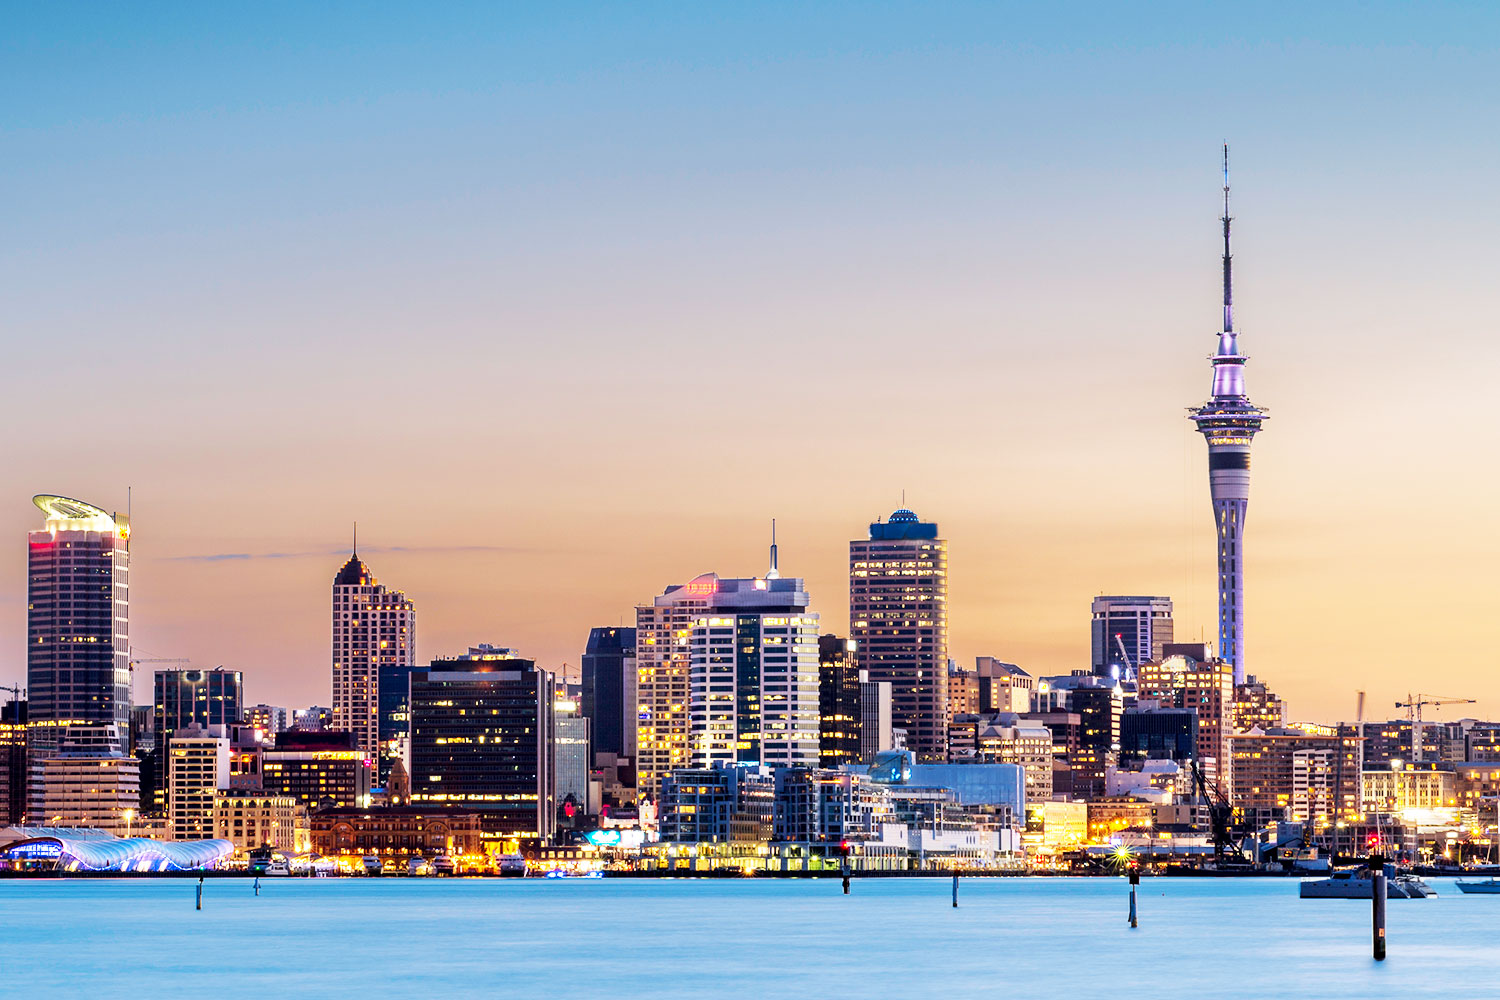 New Zealand’s Cyber Security Strategy 2019